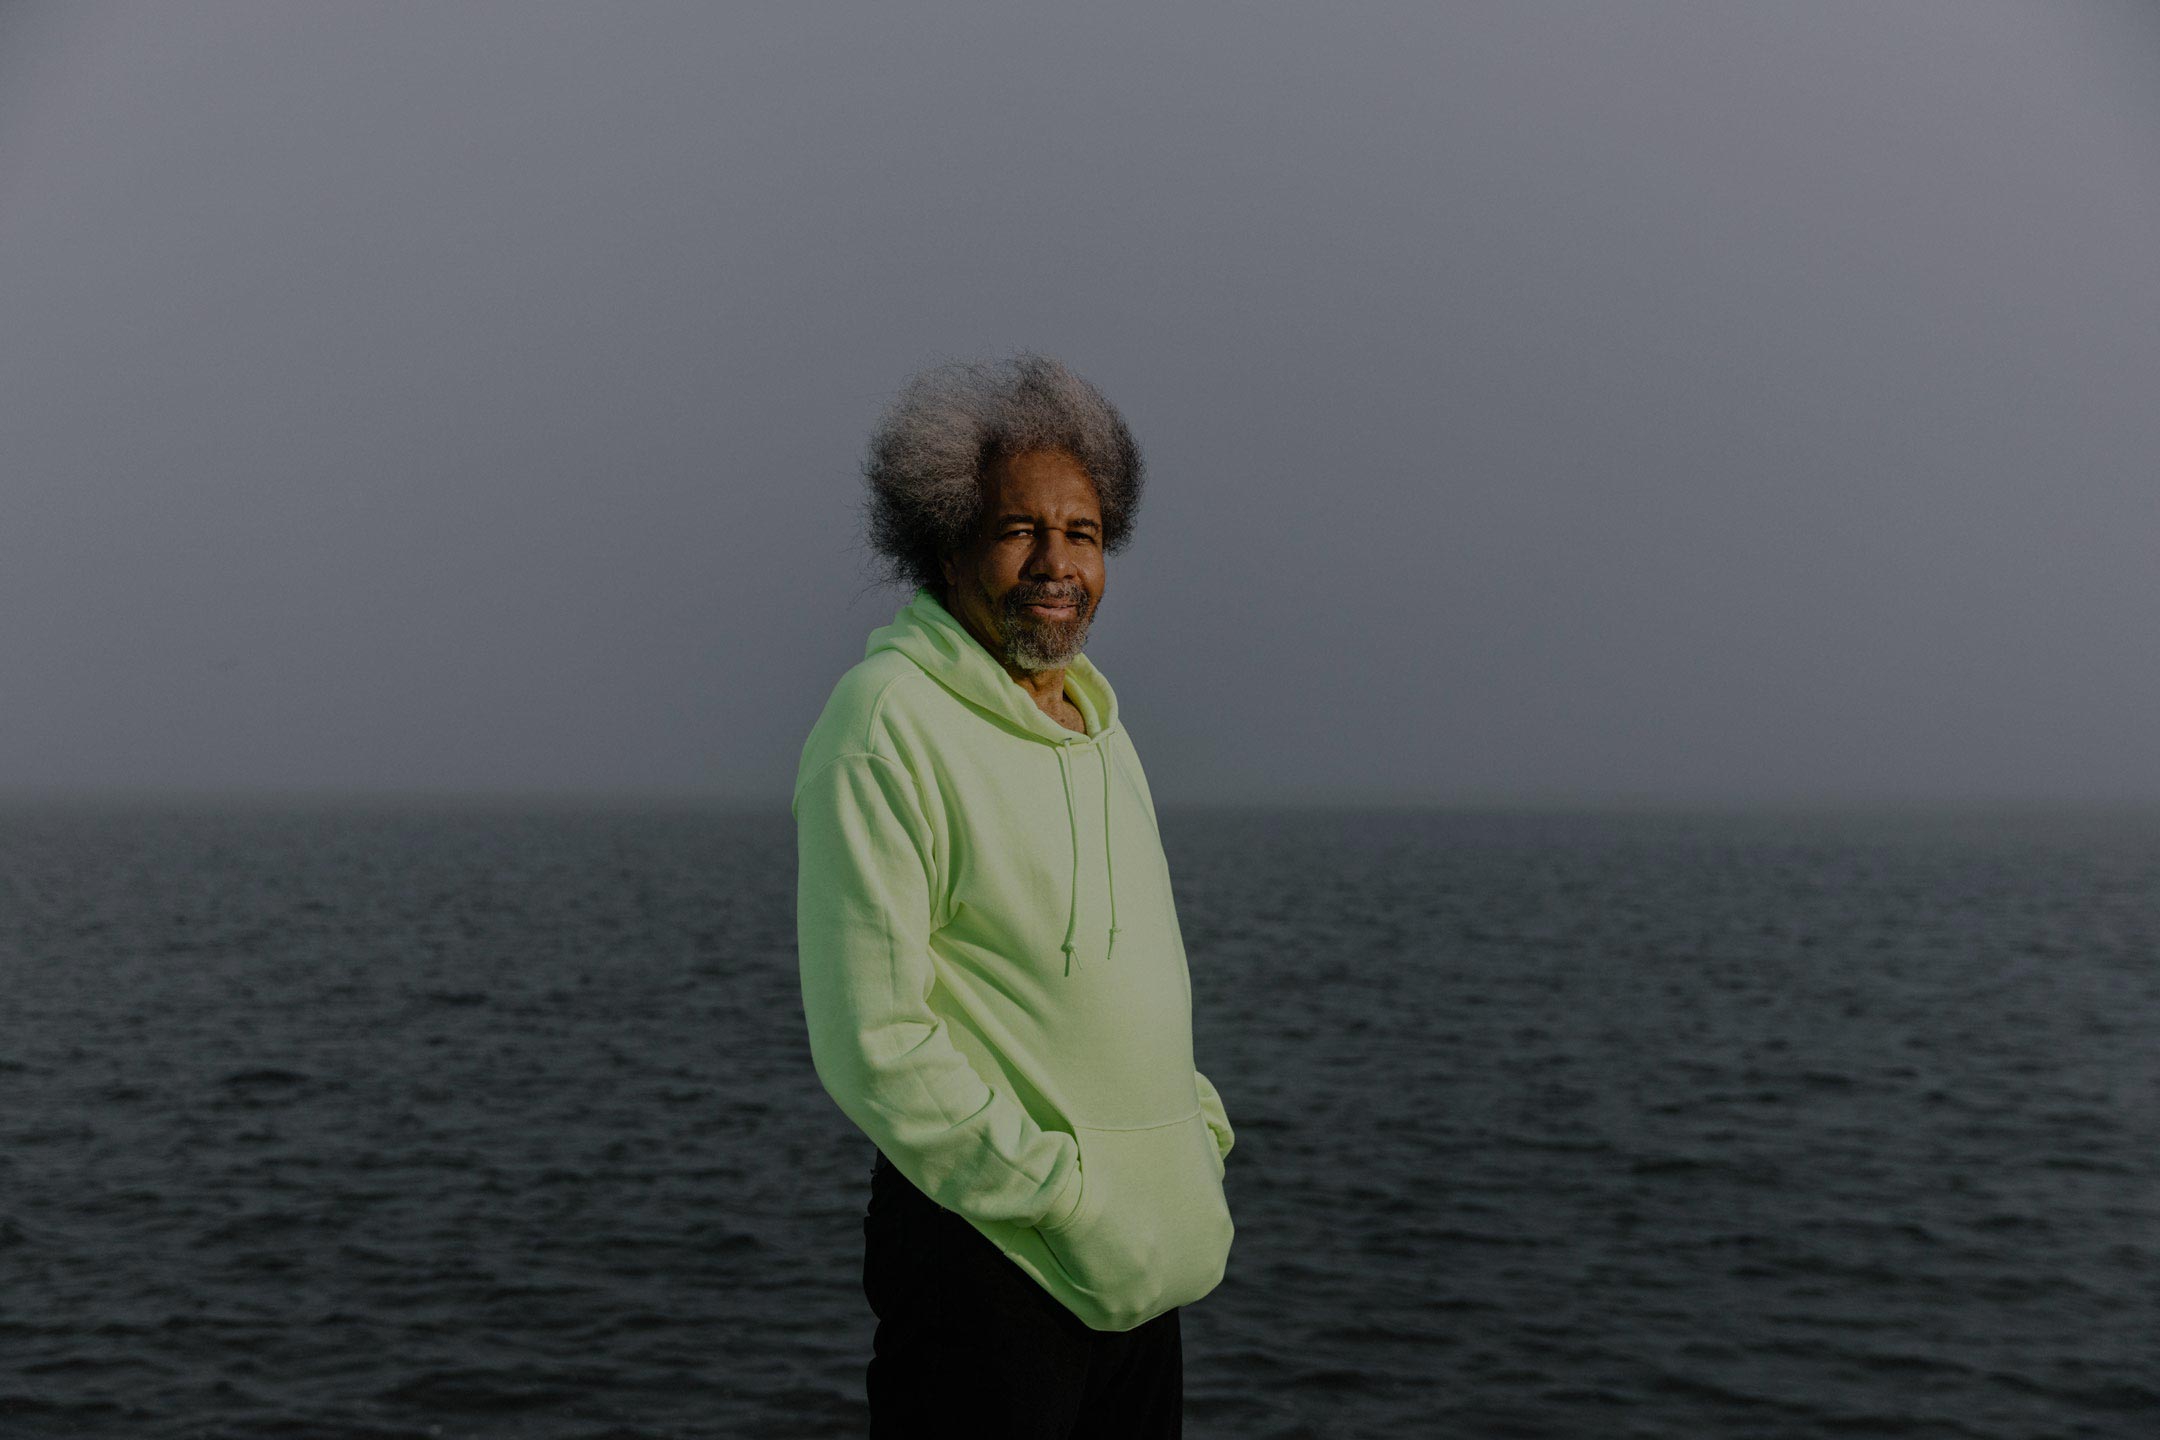 Albert Woodfox at Lake Pontchartrain in New Orleans, Feb. 2021. (Image: William Widmer for the Innocence Project) 